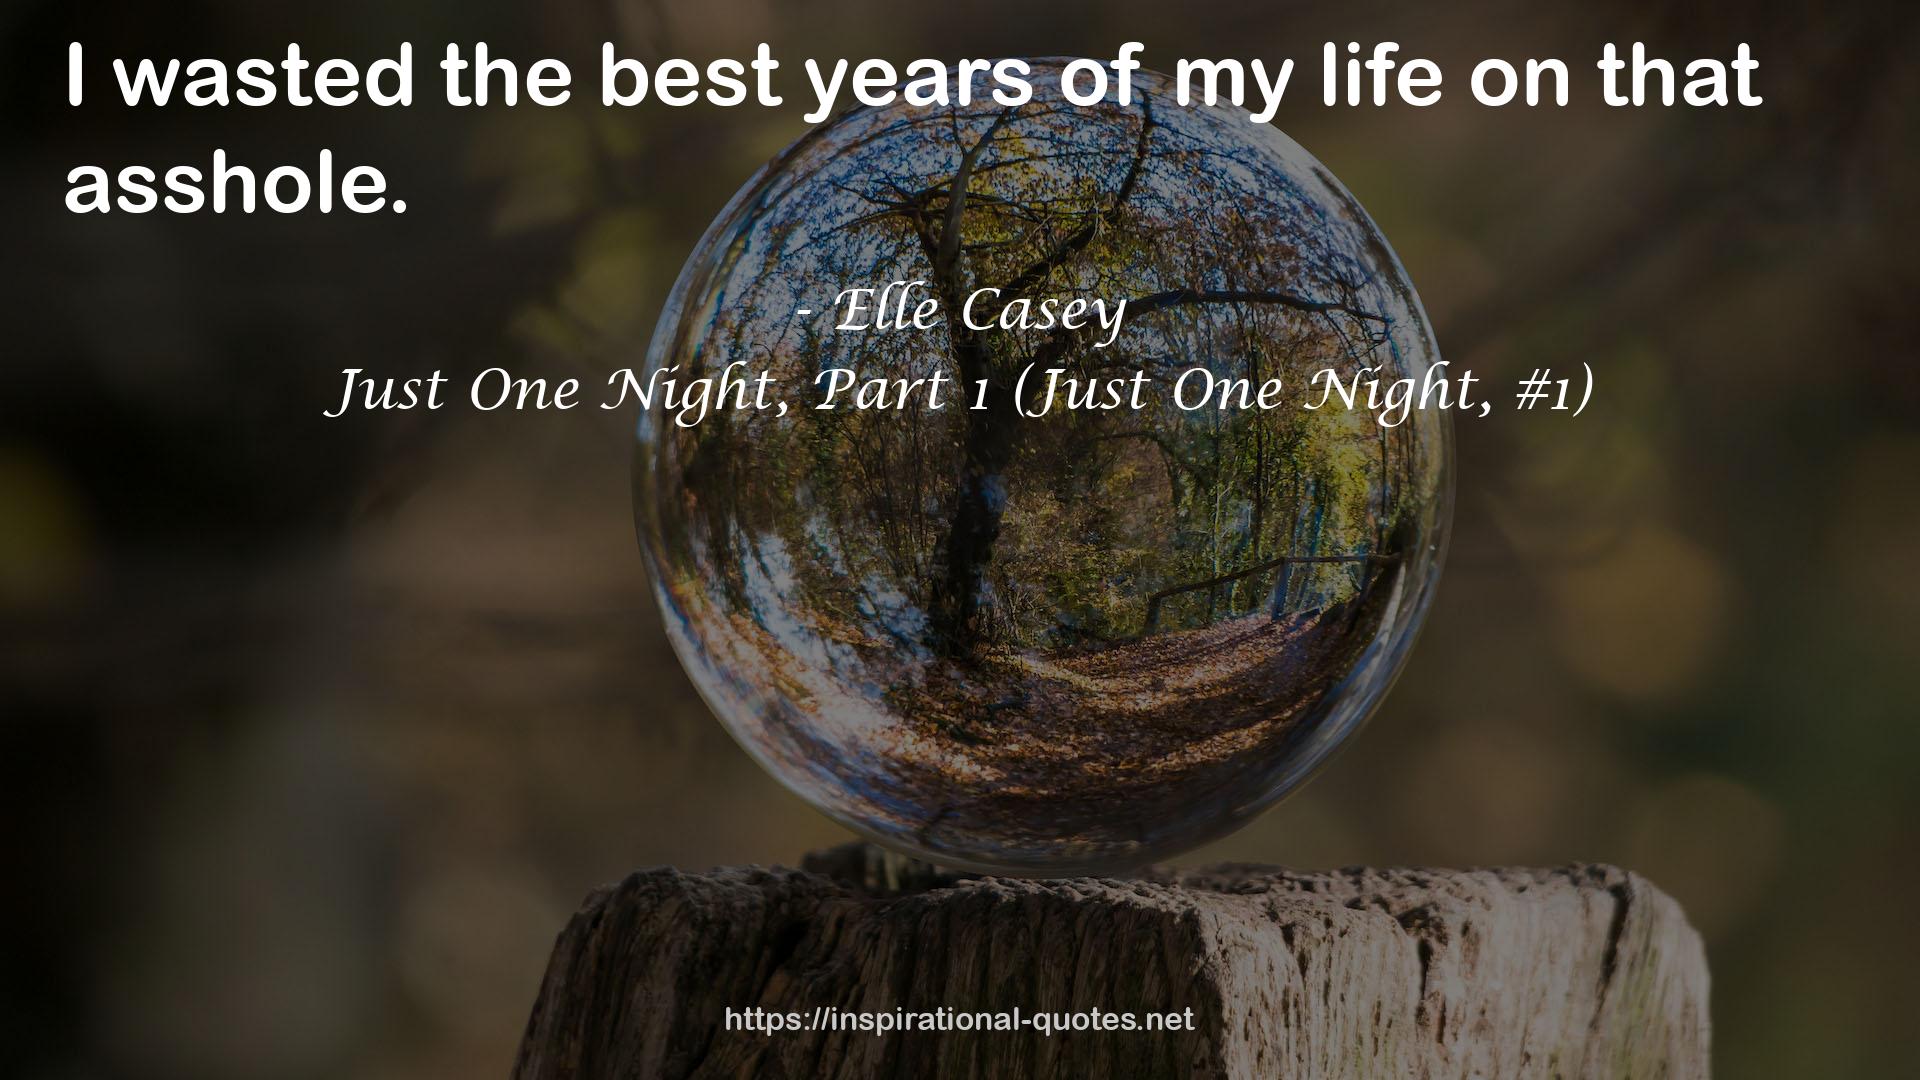 Just One Night, Part 1 (Just One Night, #1) QUOTES